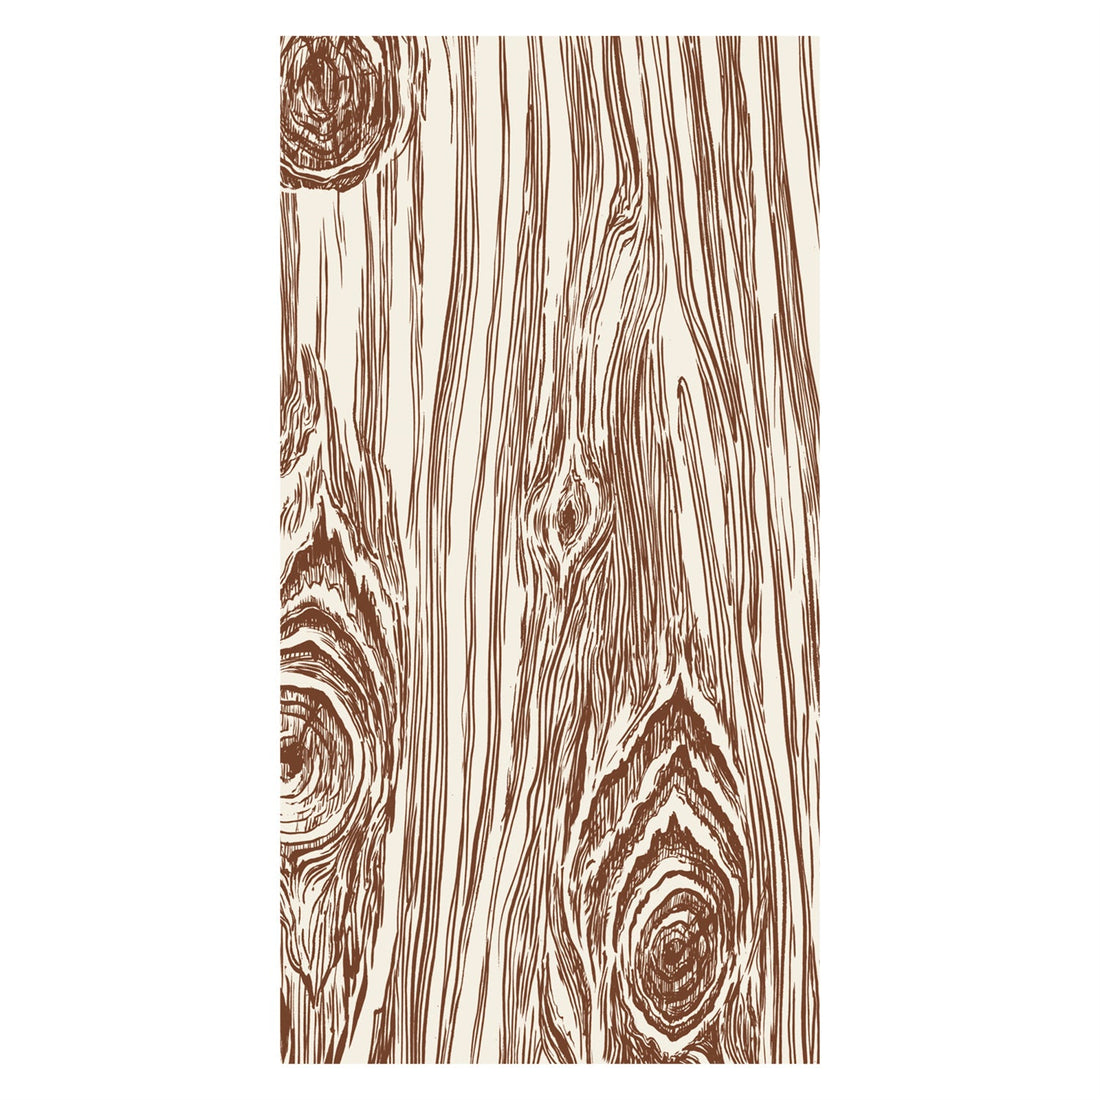 A rectangle guest napkin featuring illustrated wood grain line art in brown over a white background.